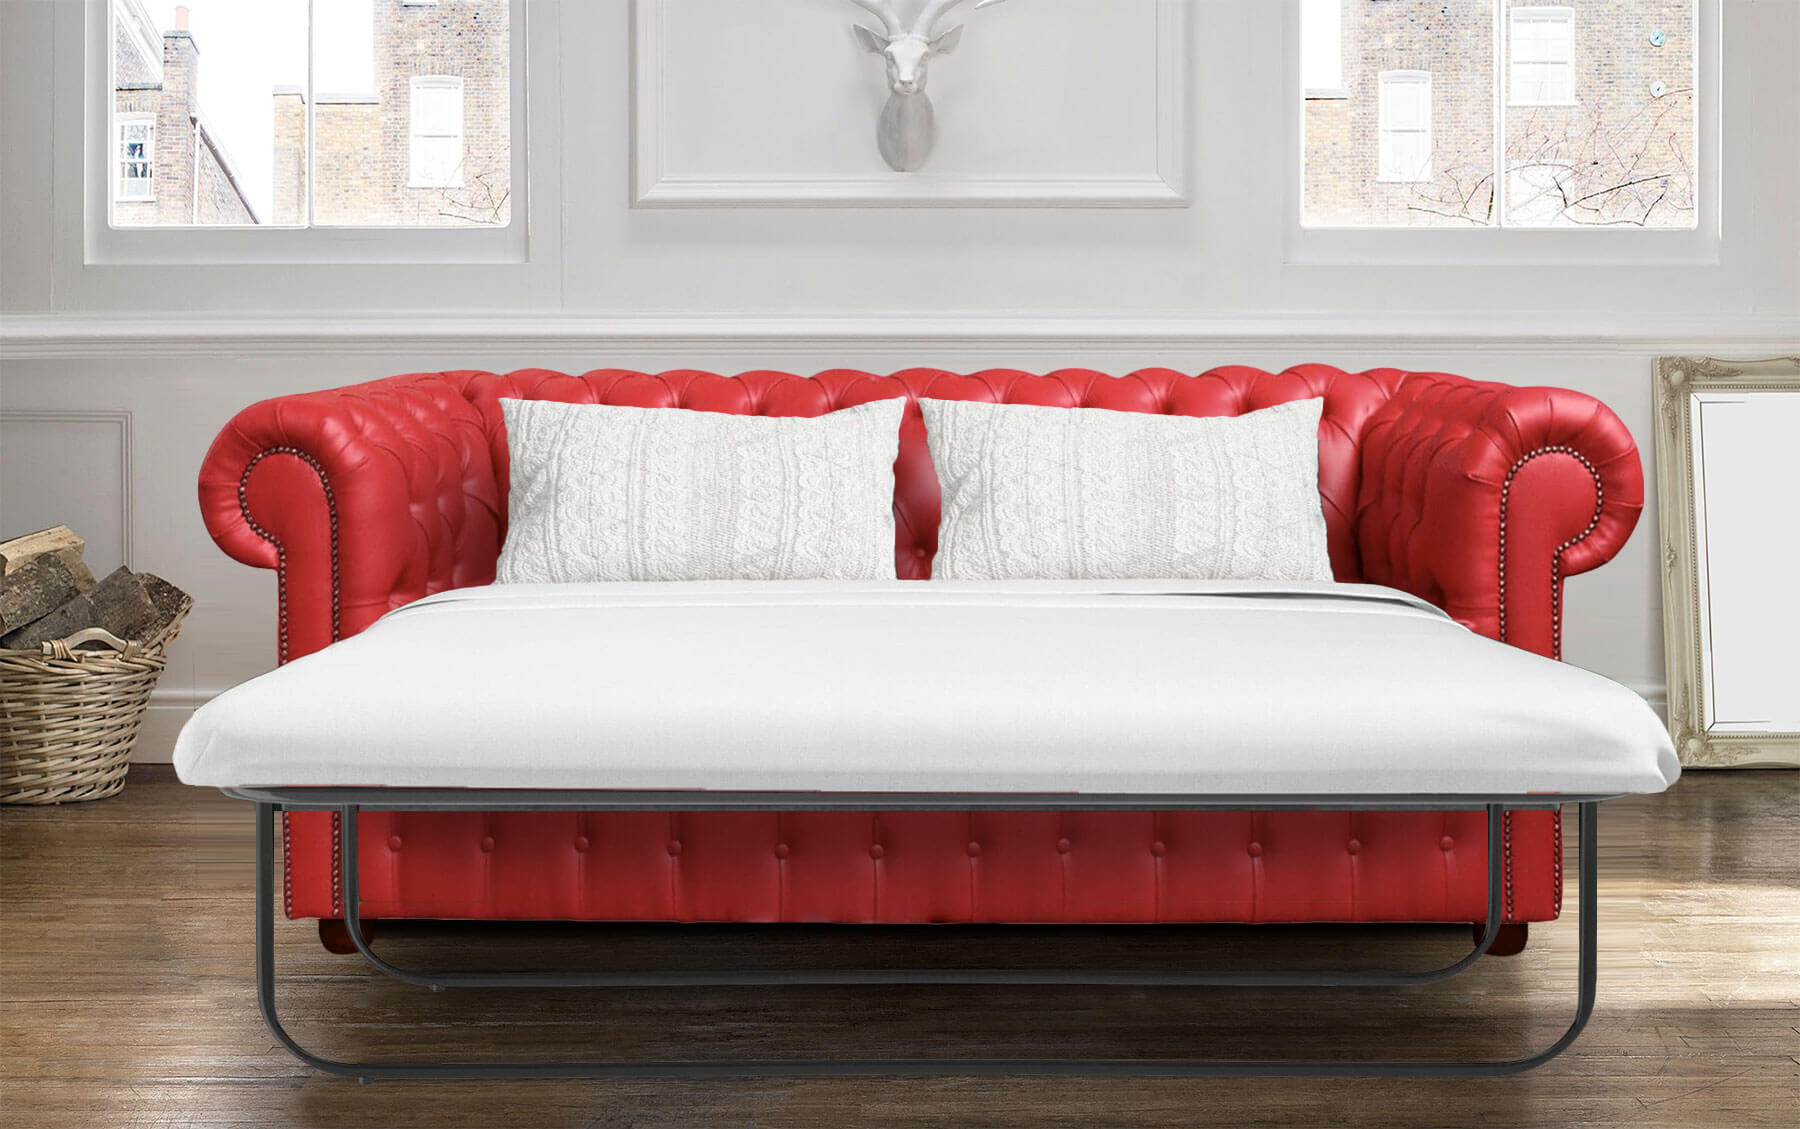 Chesterfield 3 Seater Red Faux Leather, Red Leather Bed Settee